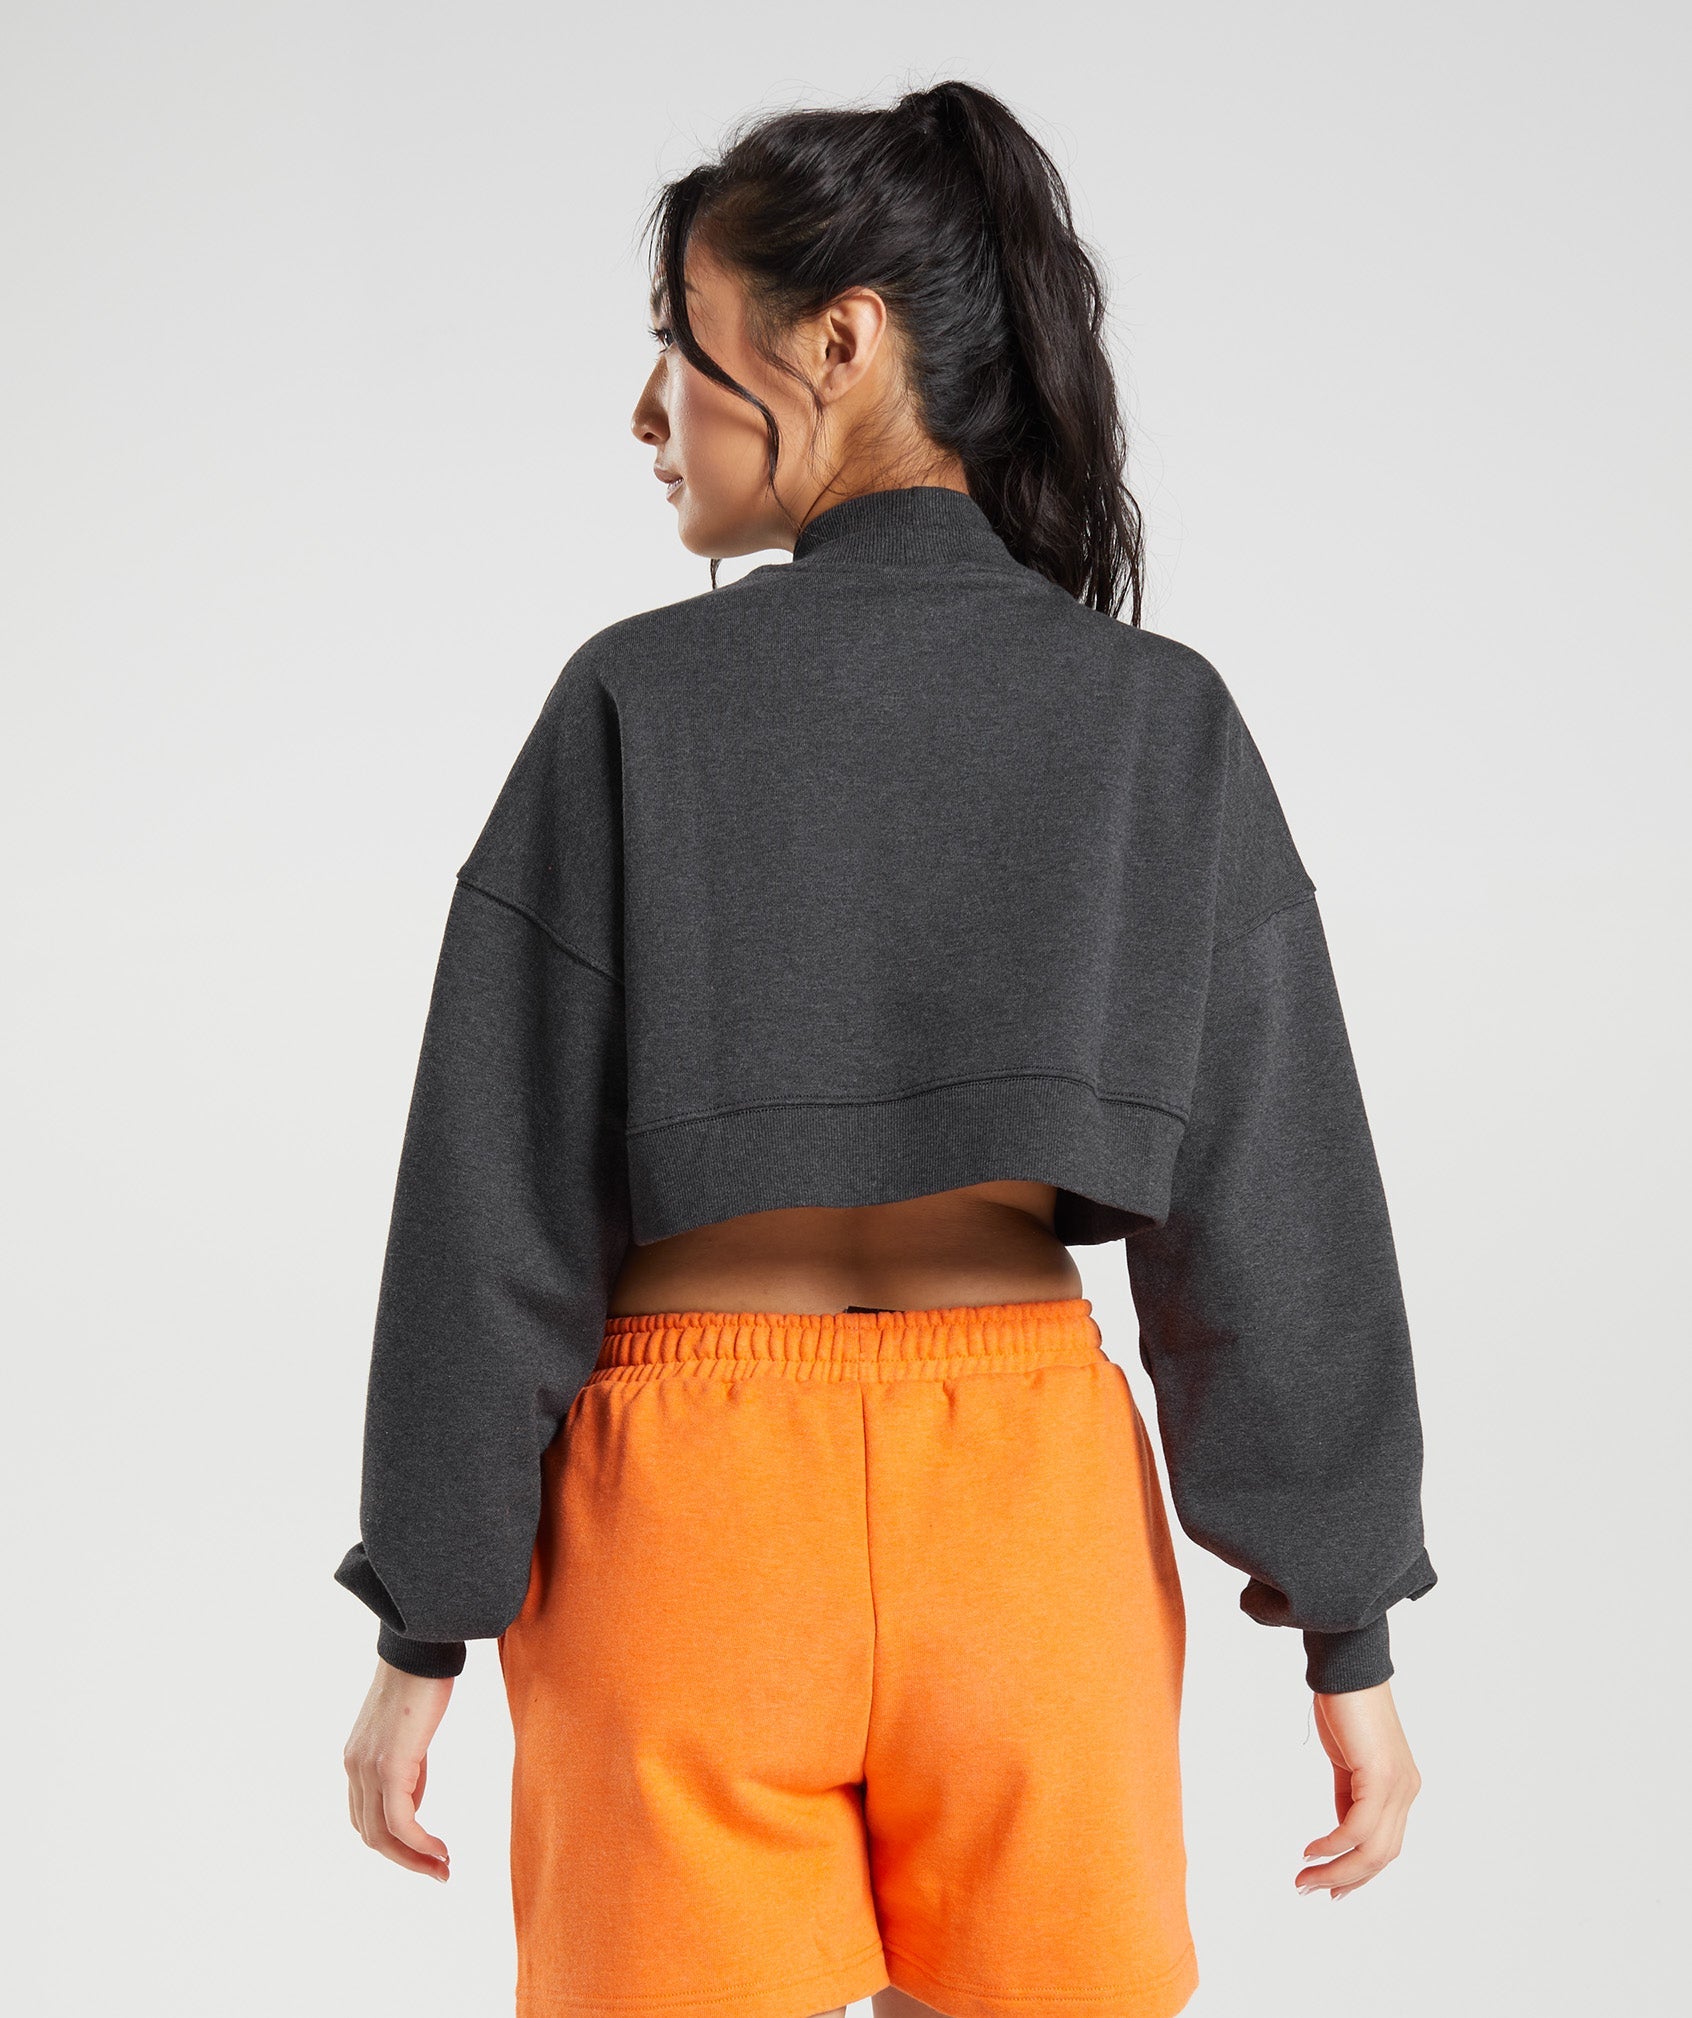 Rest Day Sweats Cropped Pullover product image 2